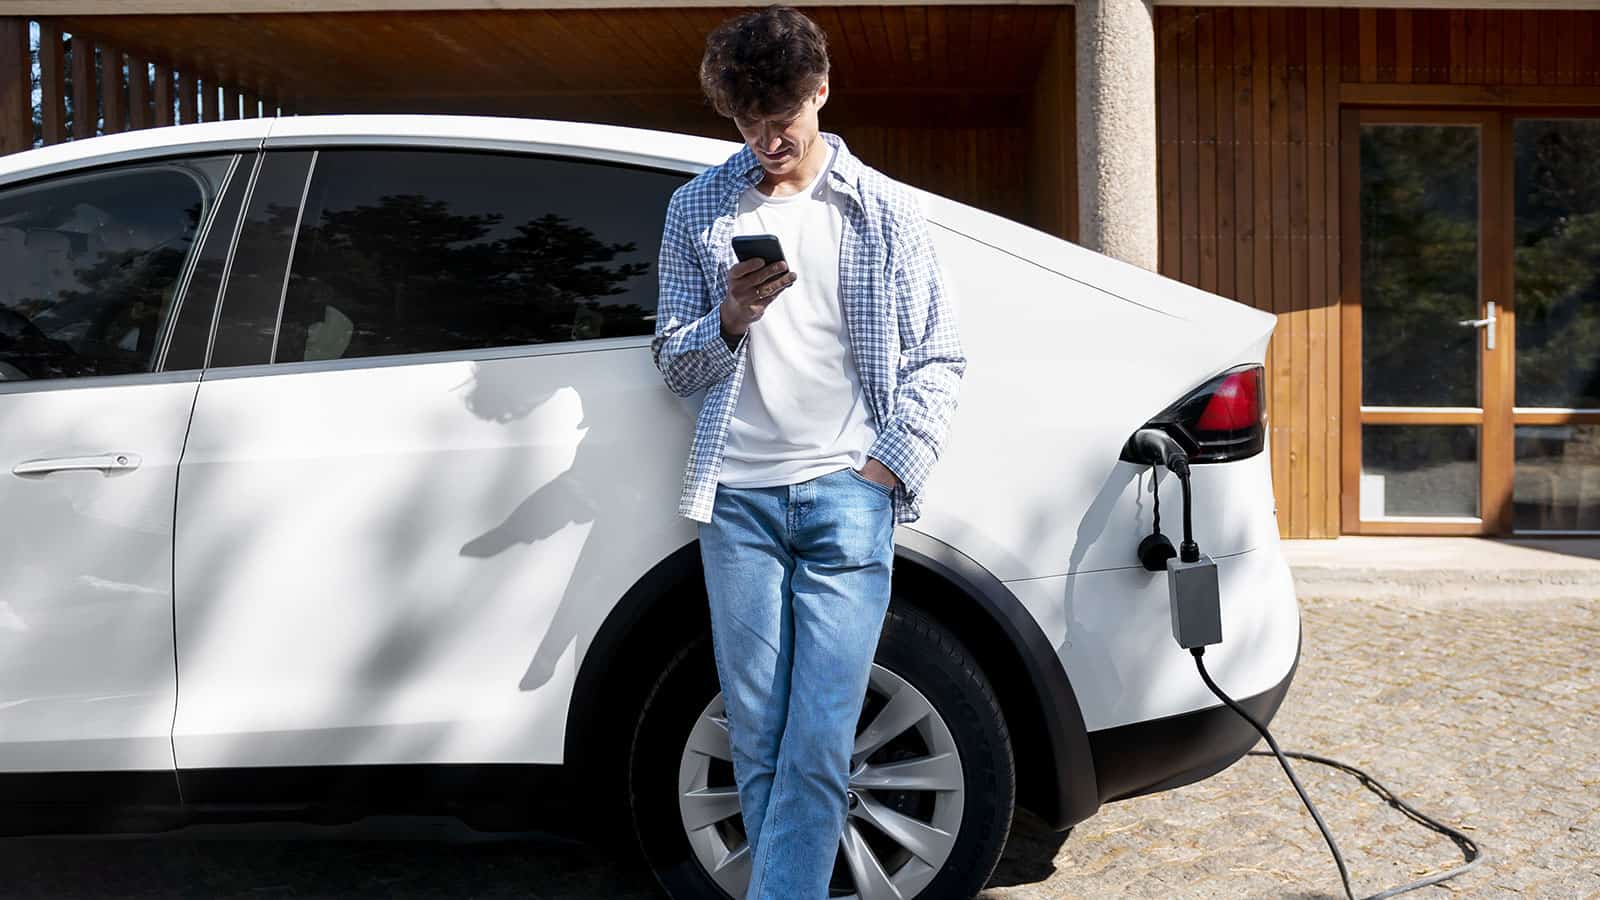 man using bluedot phone app while standing next to car charging